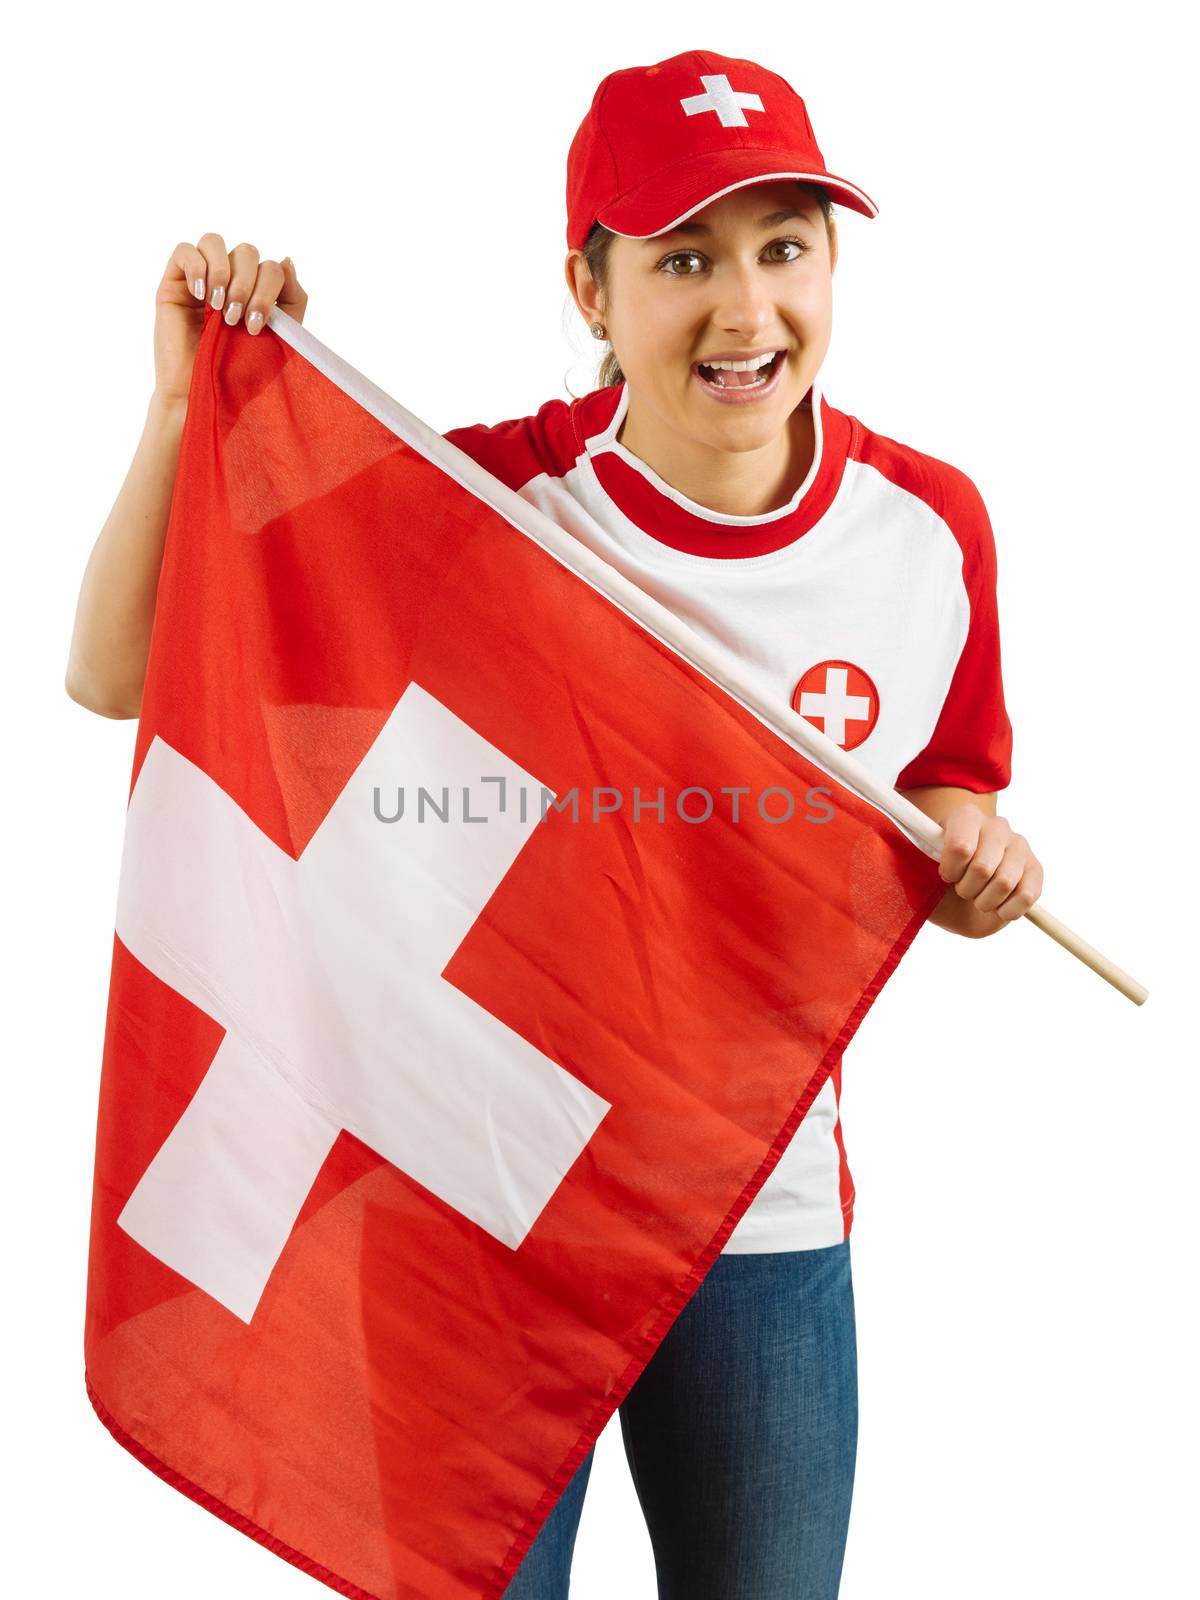 Excited Swiss sports fan by sumners